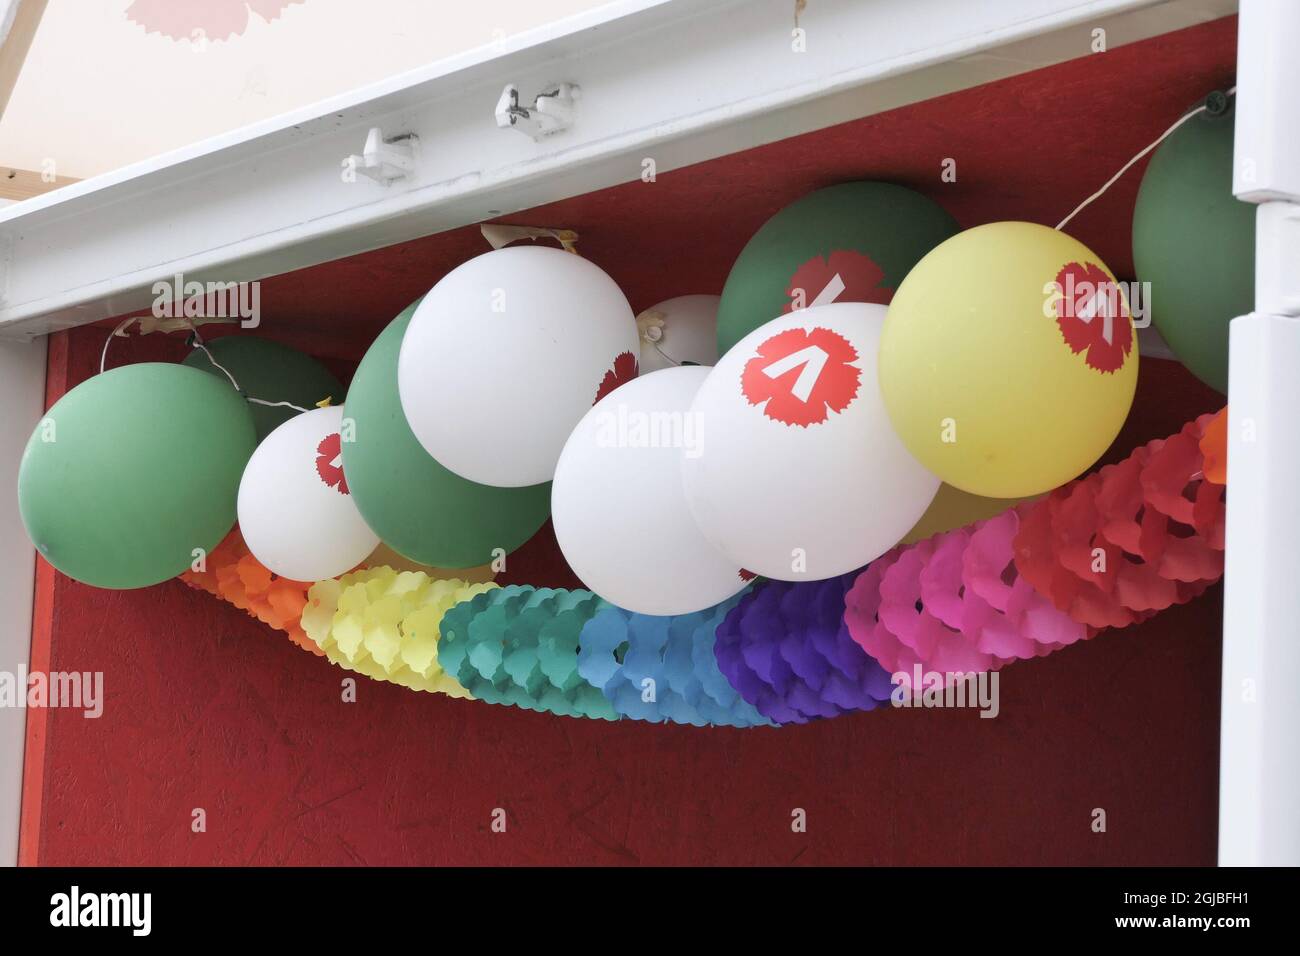 STOCKHOLM 2018-08-14 Balloons of the logotype of the Left party are seen in an election information office in a square in Stockholm, Sweden on Tuesday. Sweden goes to the ballots in a general election September 9. Photo Leif Blom / TT Code 50080  Stock Photo